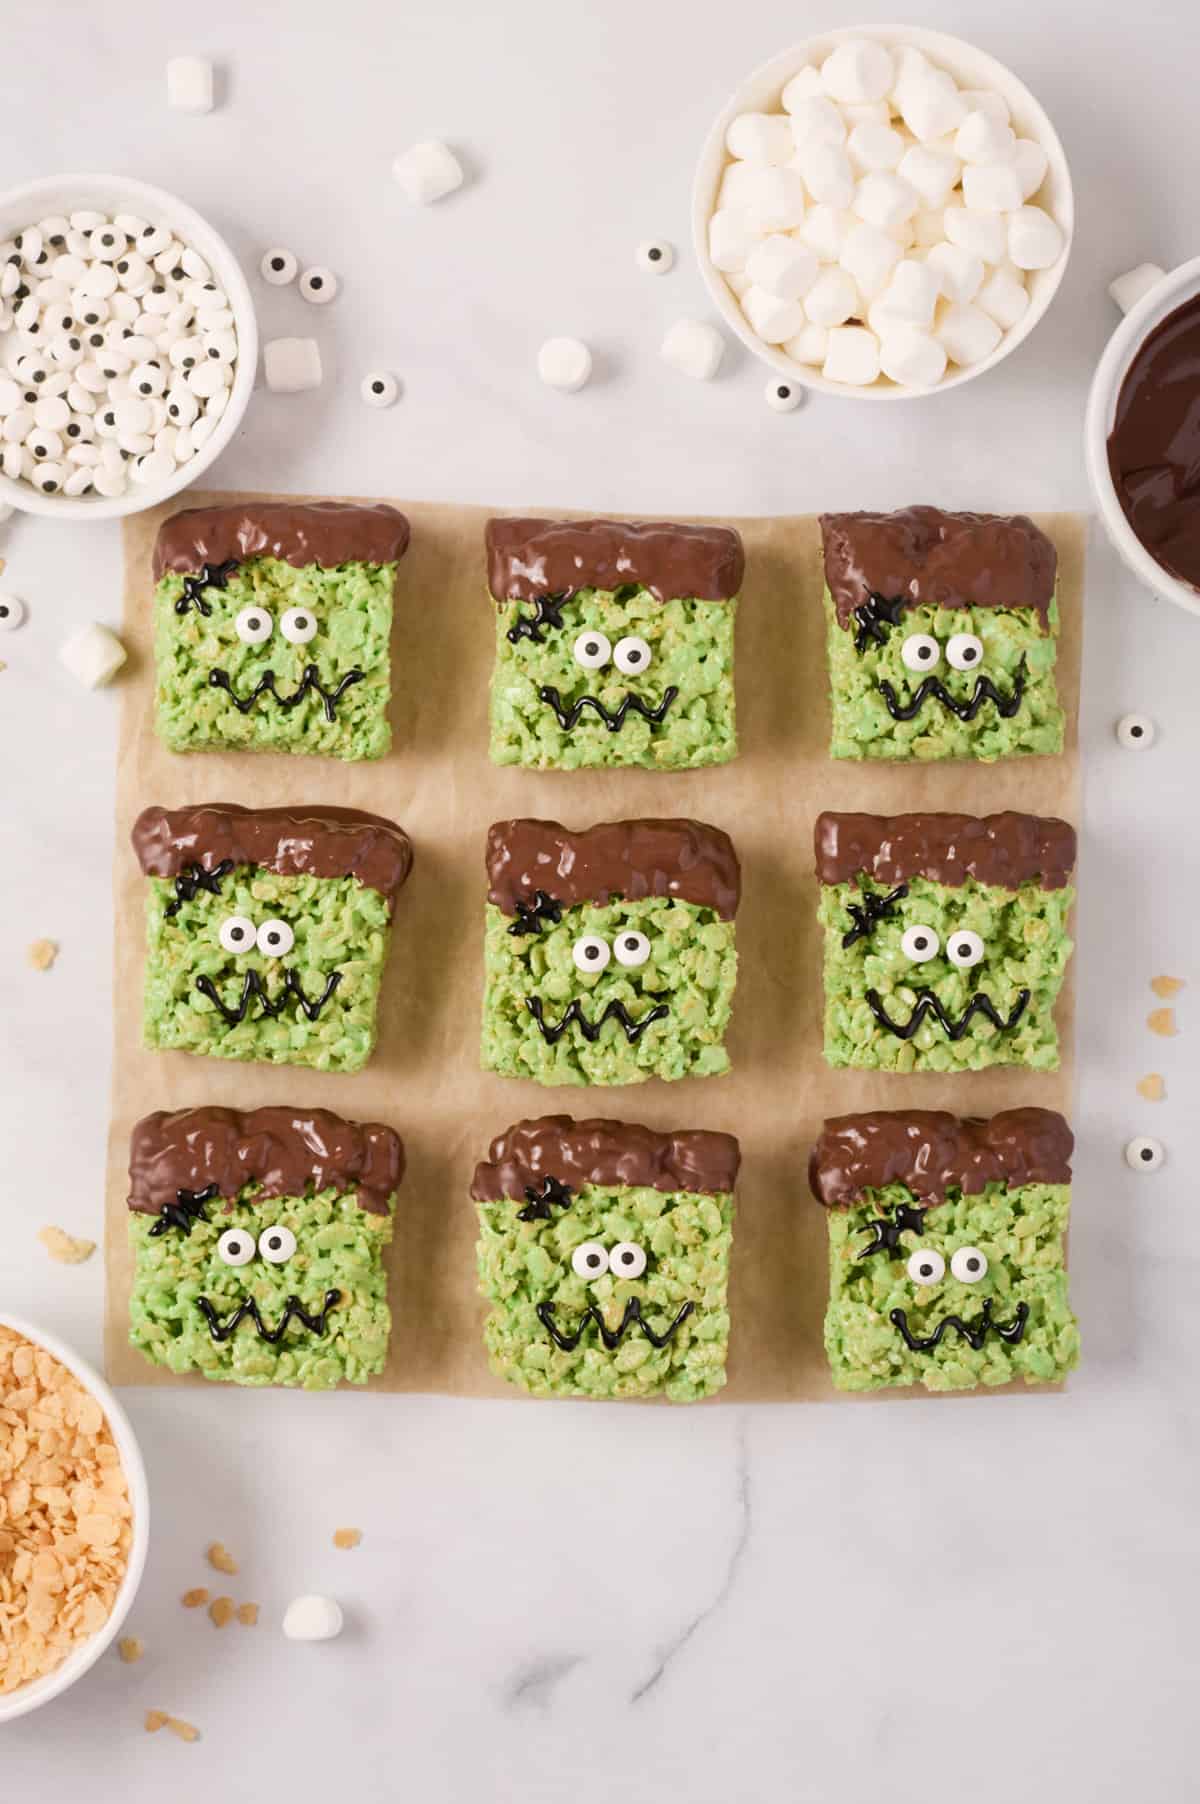 Frankenstein treats with black icing added to make mouth and scar on head.